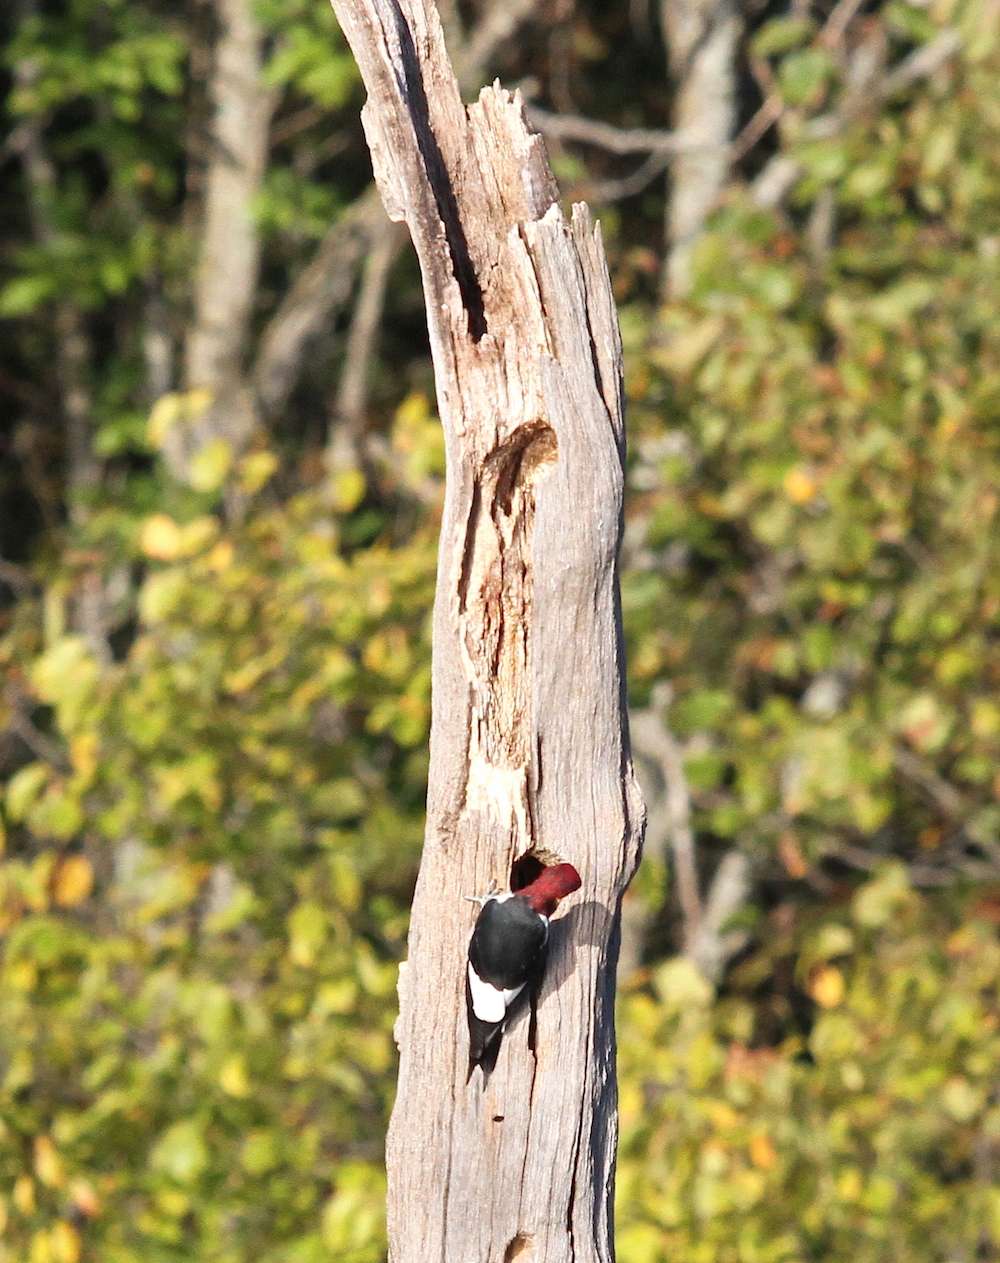 This woodpecker played peekaboo with Watson as he made his way down the bank.